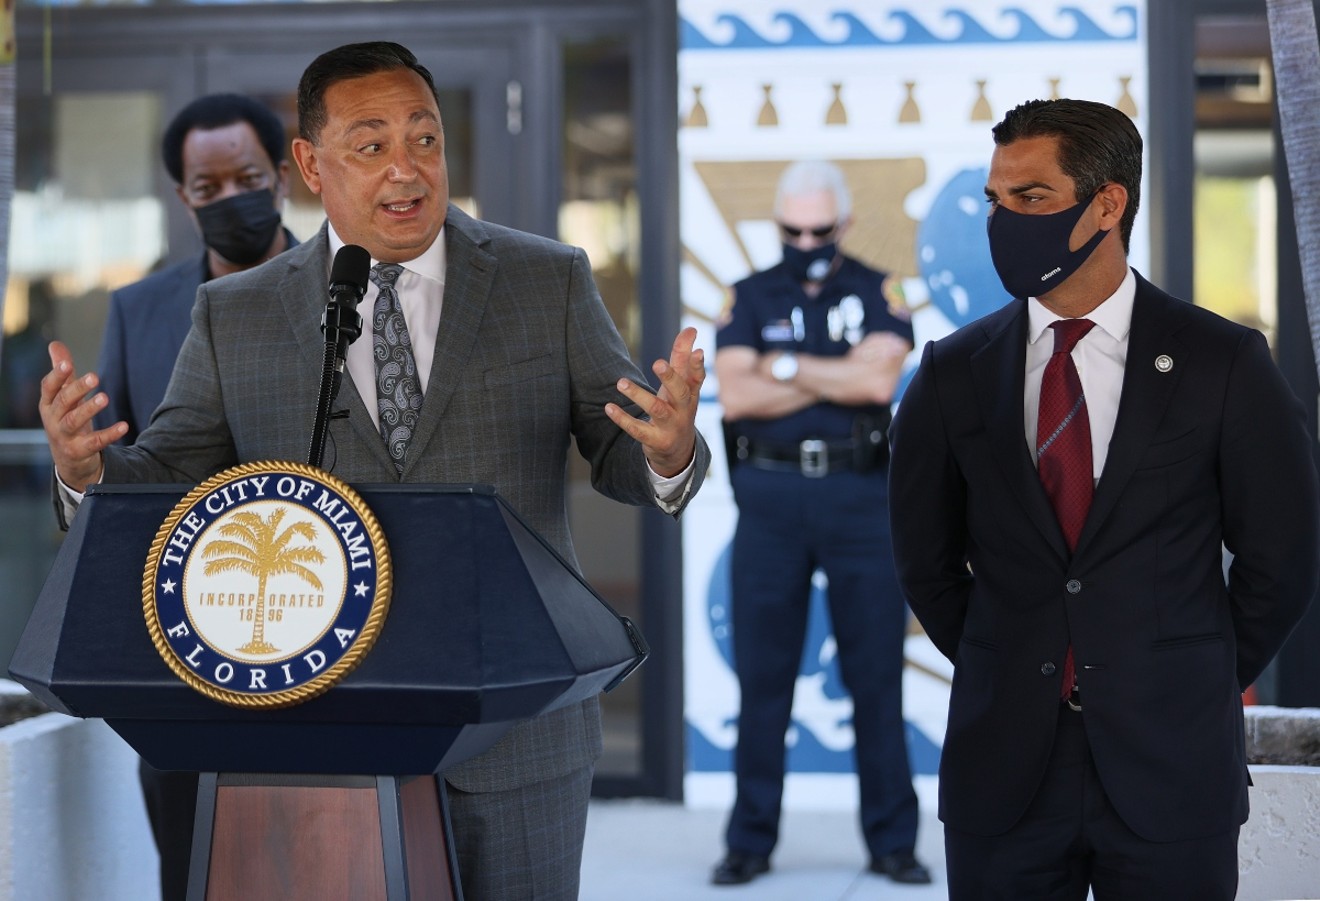 Miami's new police chief, Art Acevedo, speaks to the media alongside Mayor Francis Suarez during his introduction at City Hall.